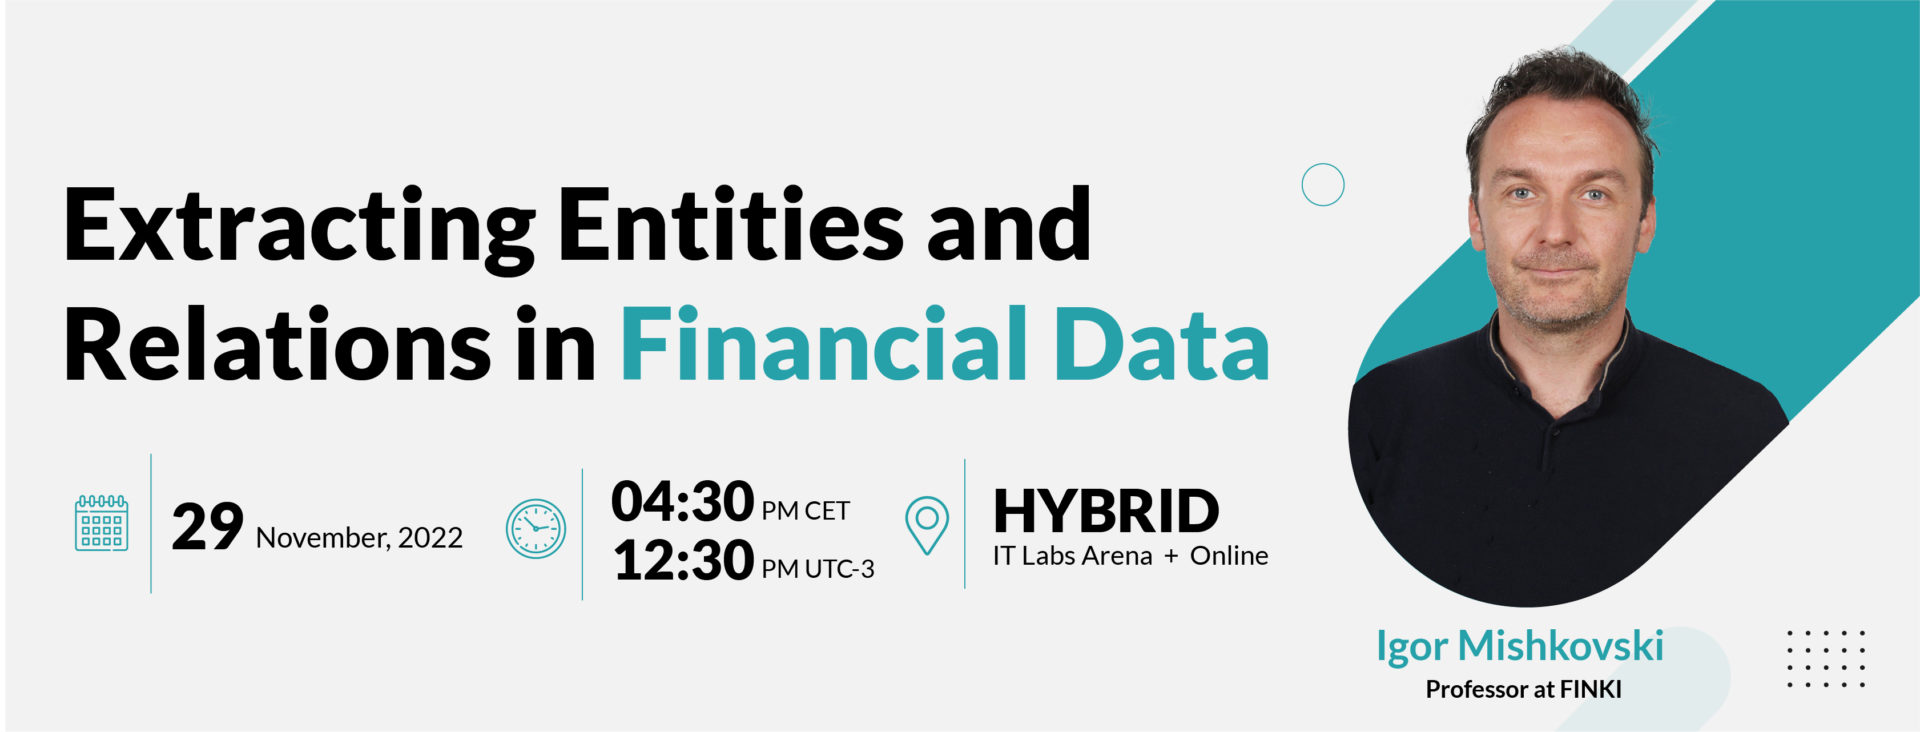 Extracting Entities and Relations in Financial Data